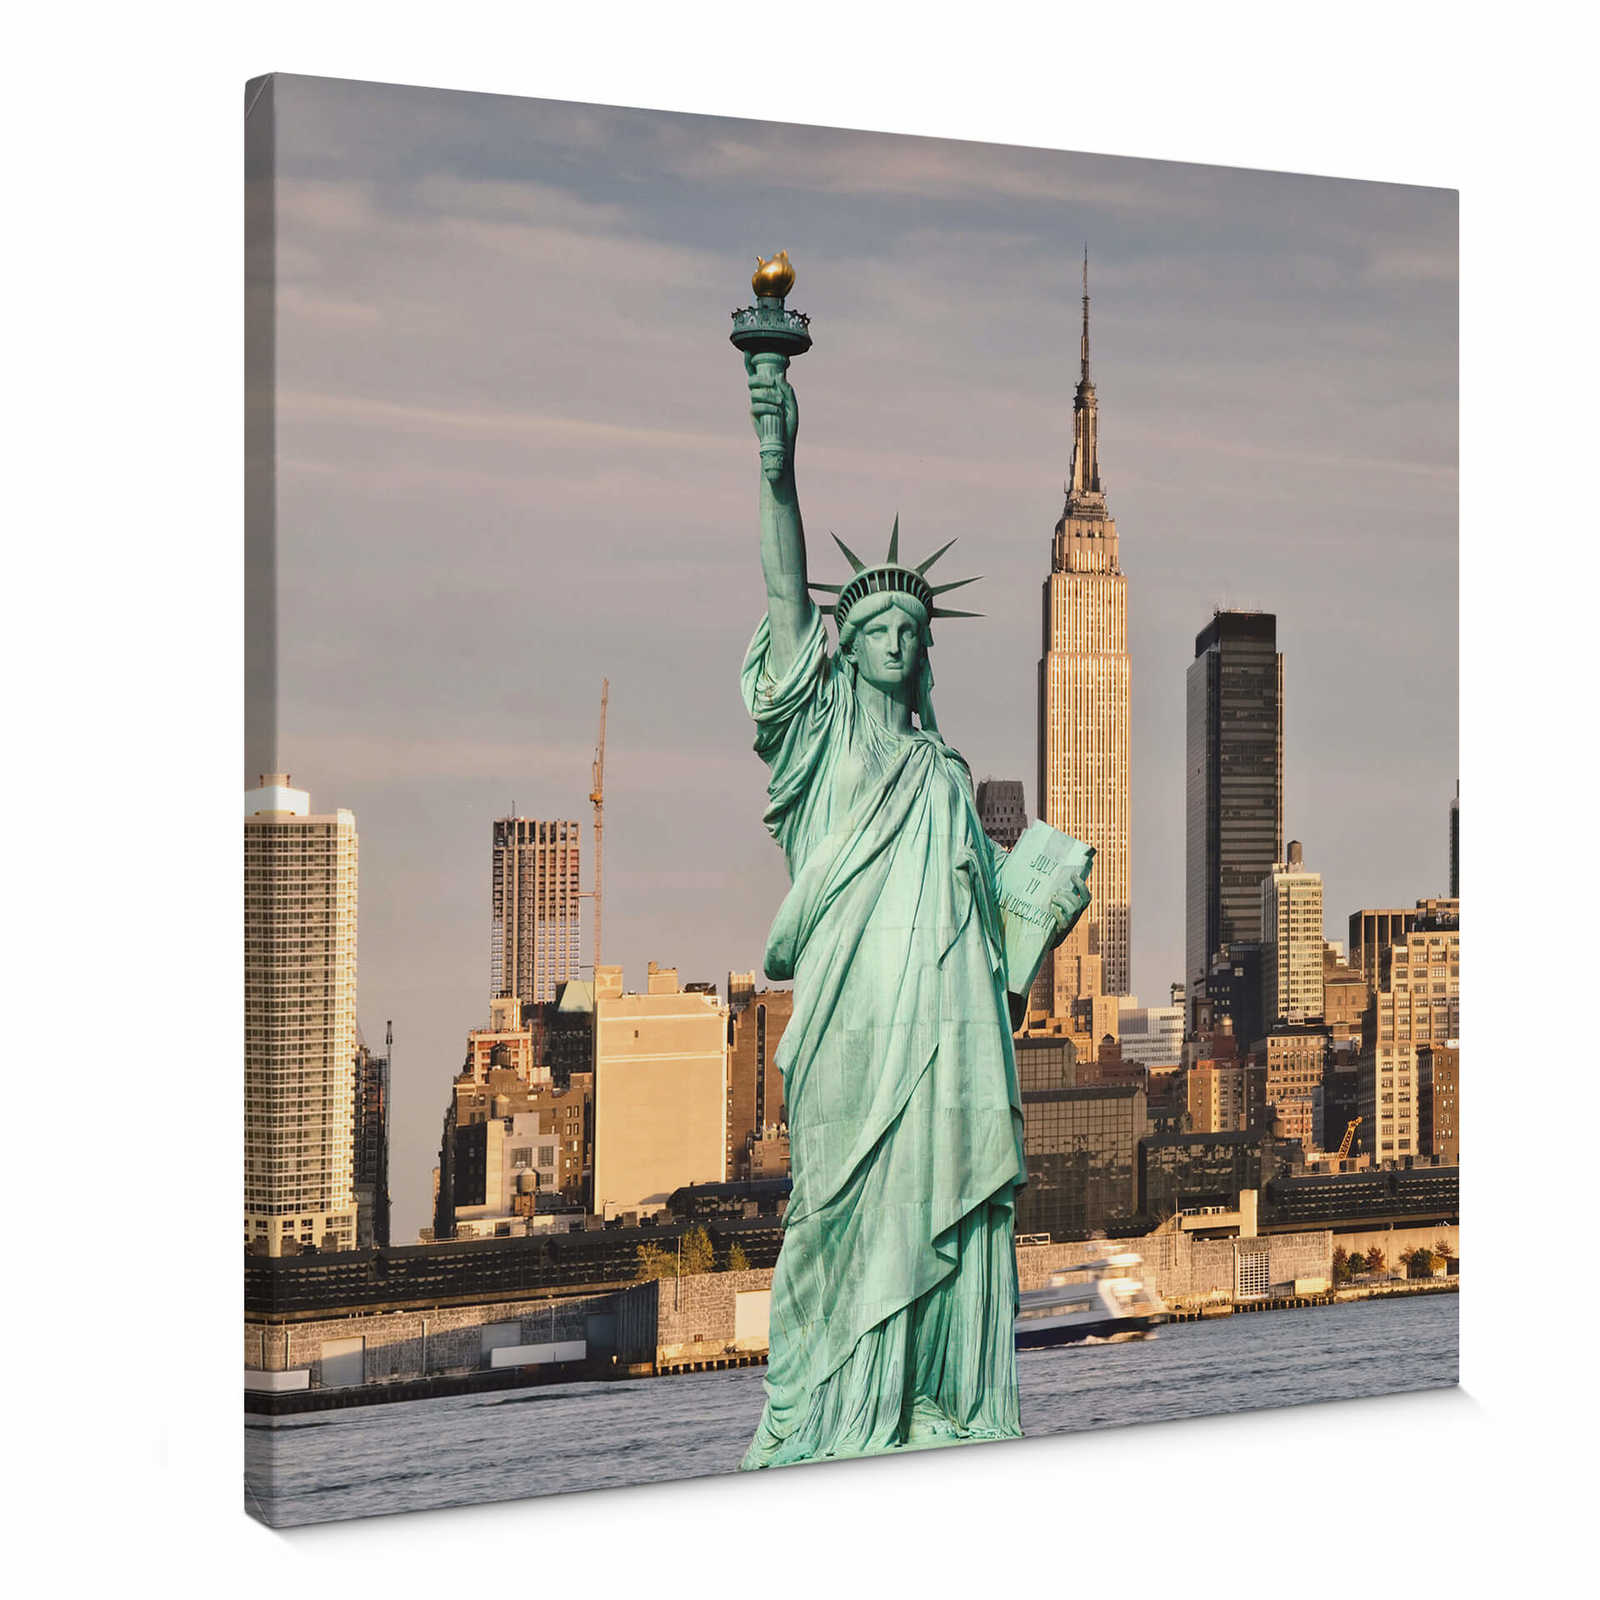         Square canvas picture Statue of Liberty , New York
    